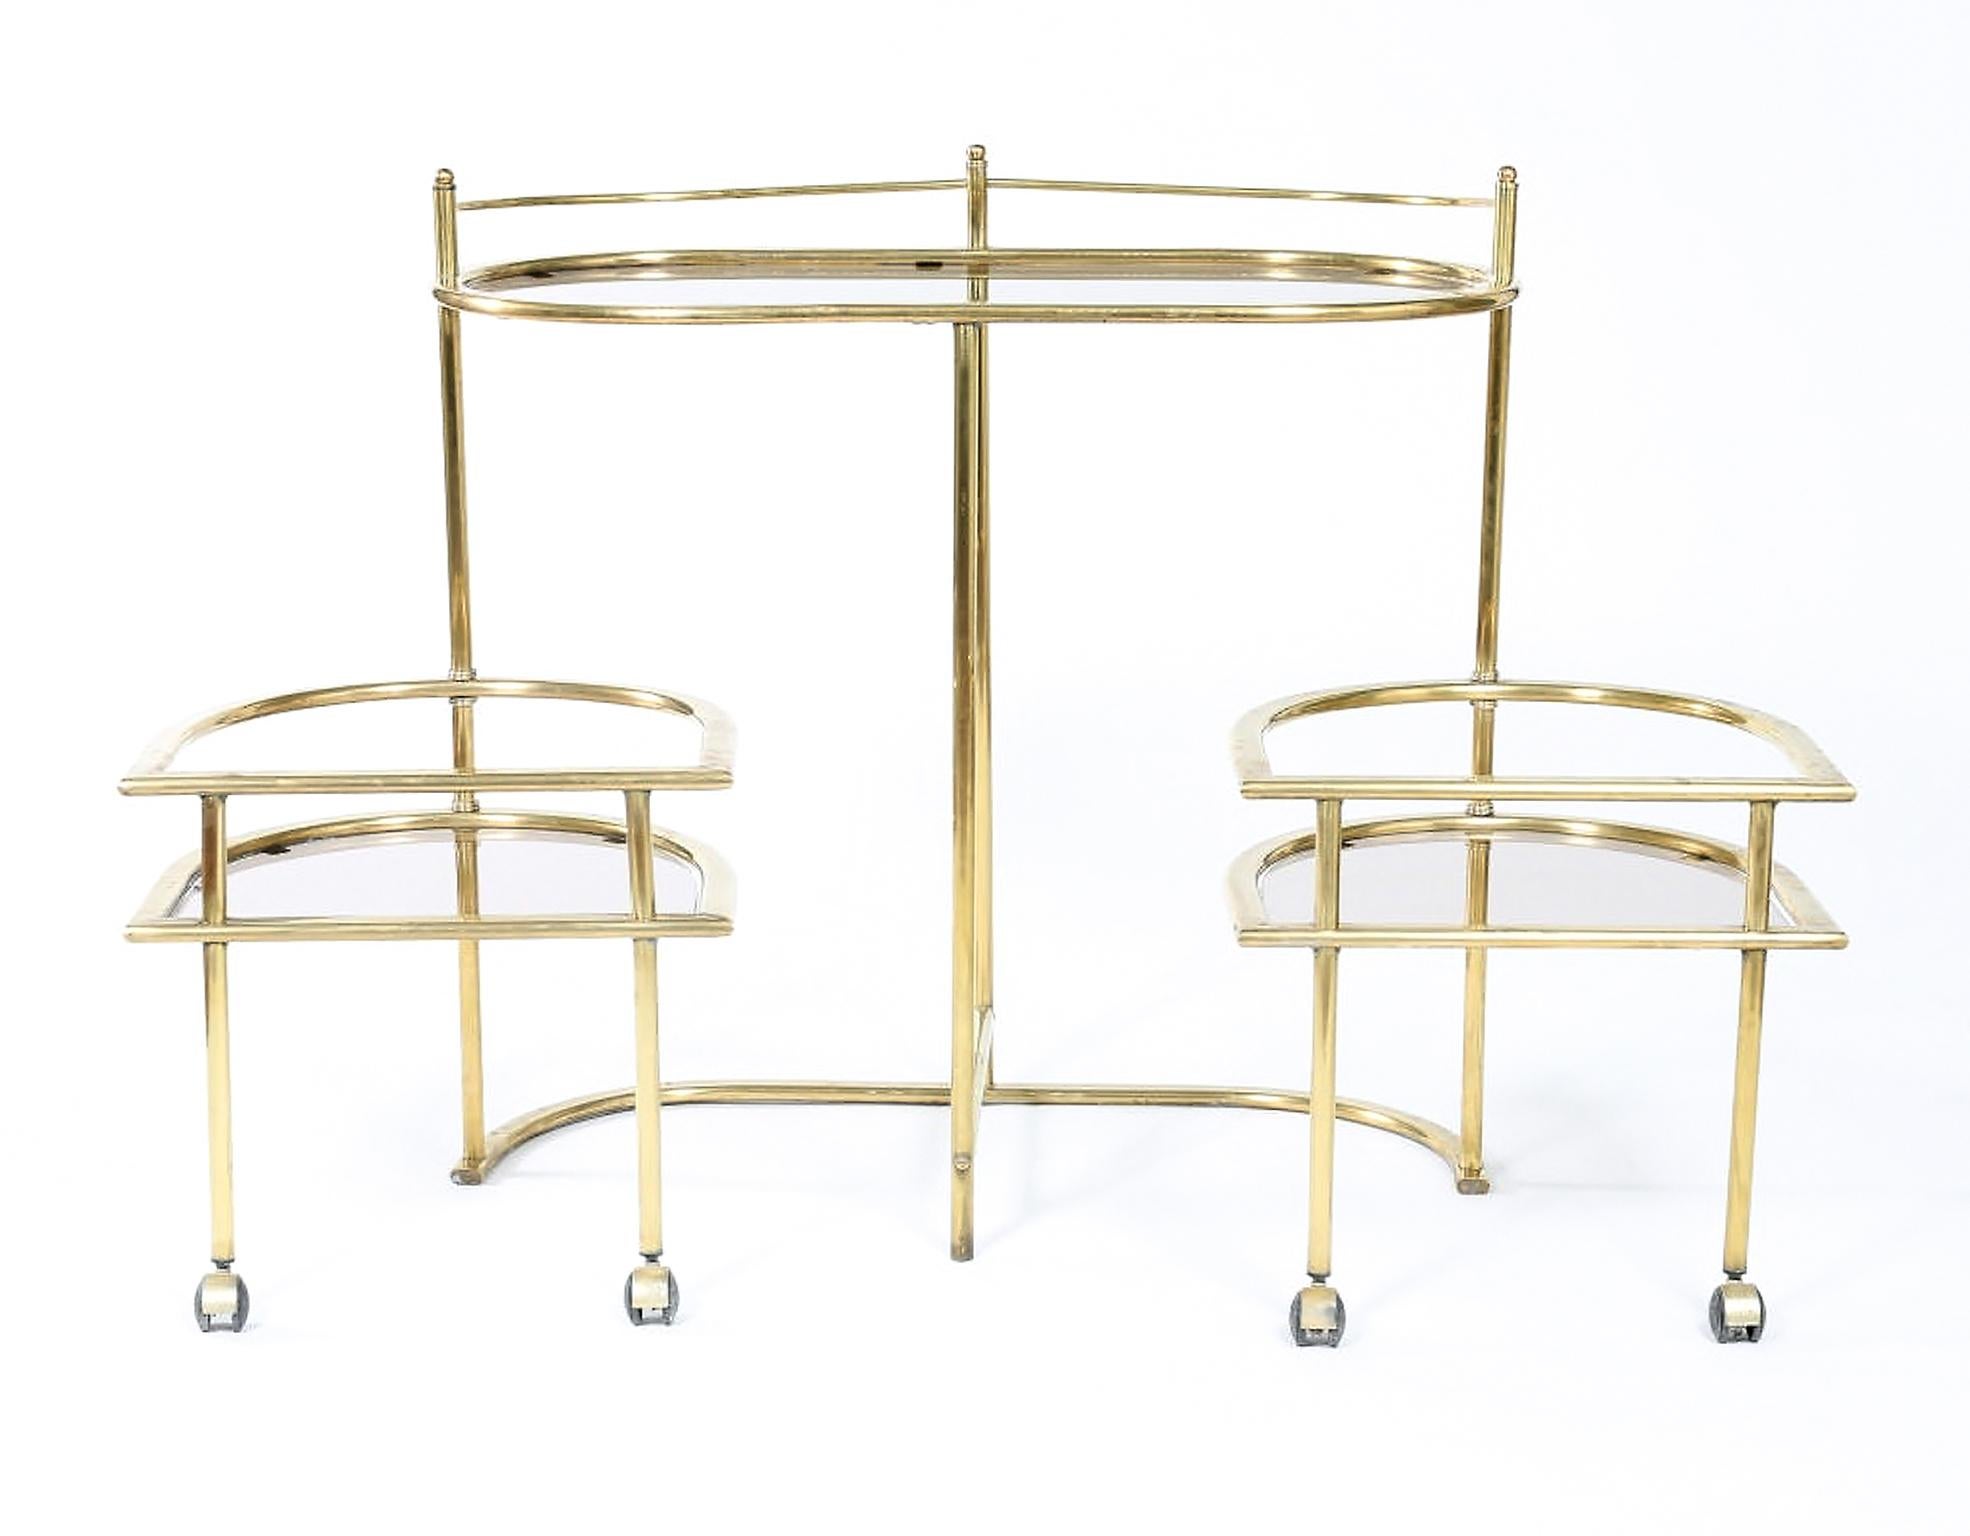 Mid-Century Modern two tiered brass/tinted glass bar cart with two swing out serving tables . The bar cart is in good vintage condition with appropriate wear consistent with age / use . It measures about 34.5 inches high X 35 inches wide X 18.5